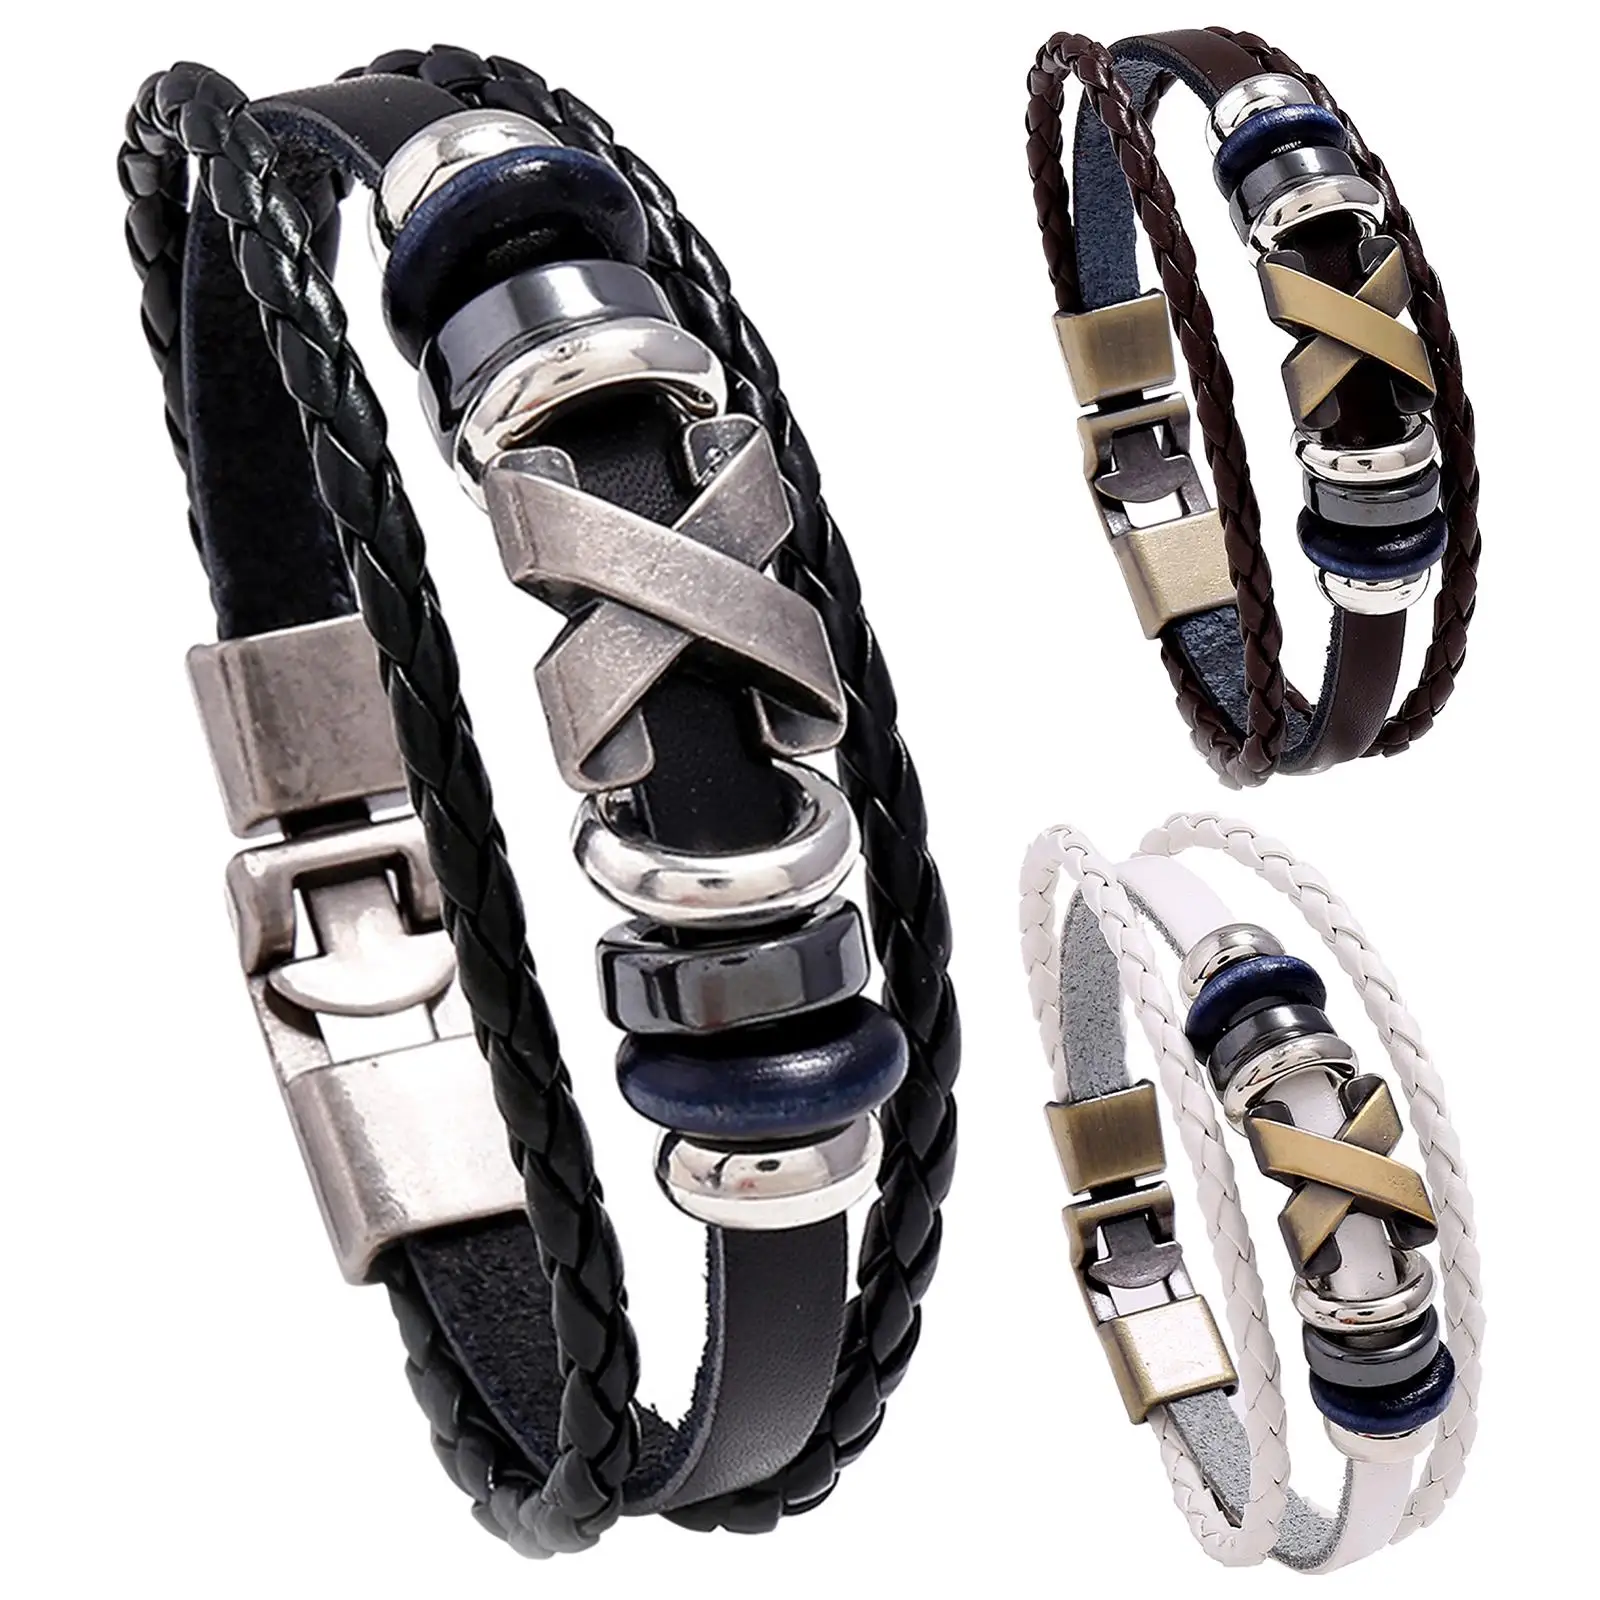 Braided Leather Bracelet Wrist Cuff Bangle Beads Charms with Alloy Closure